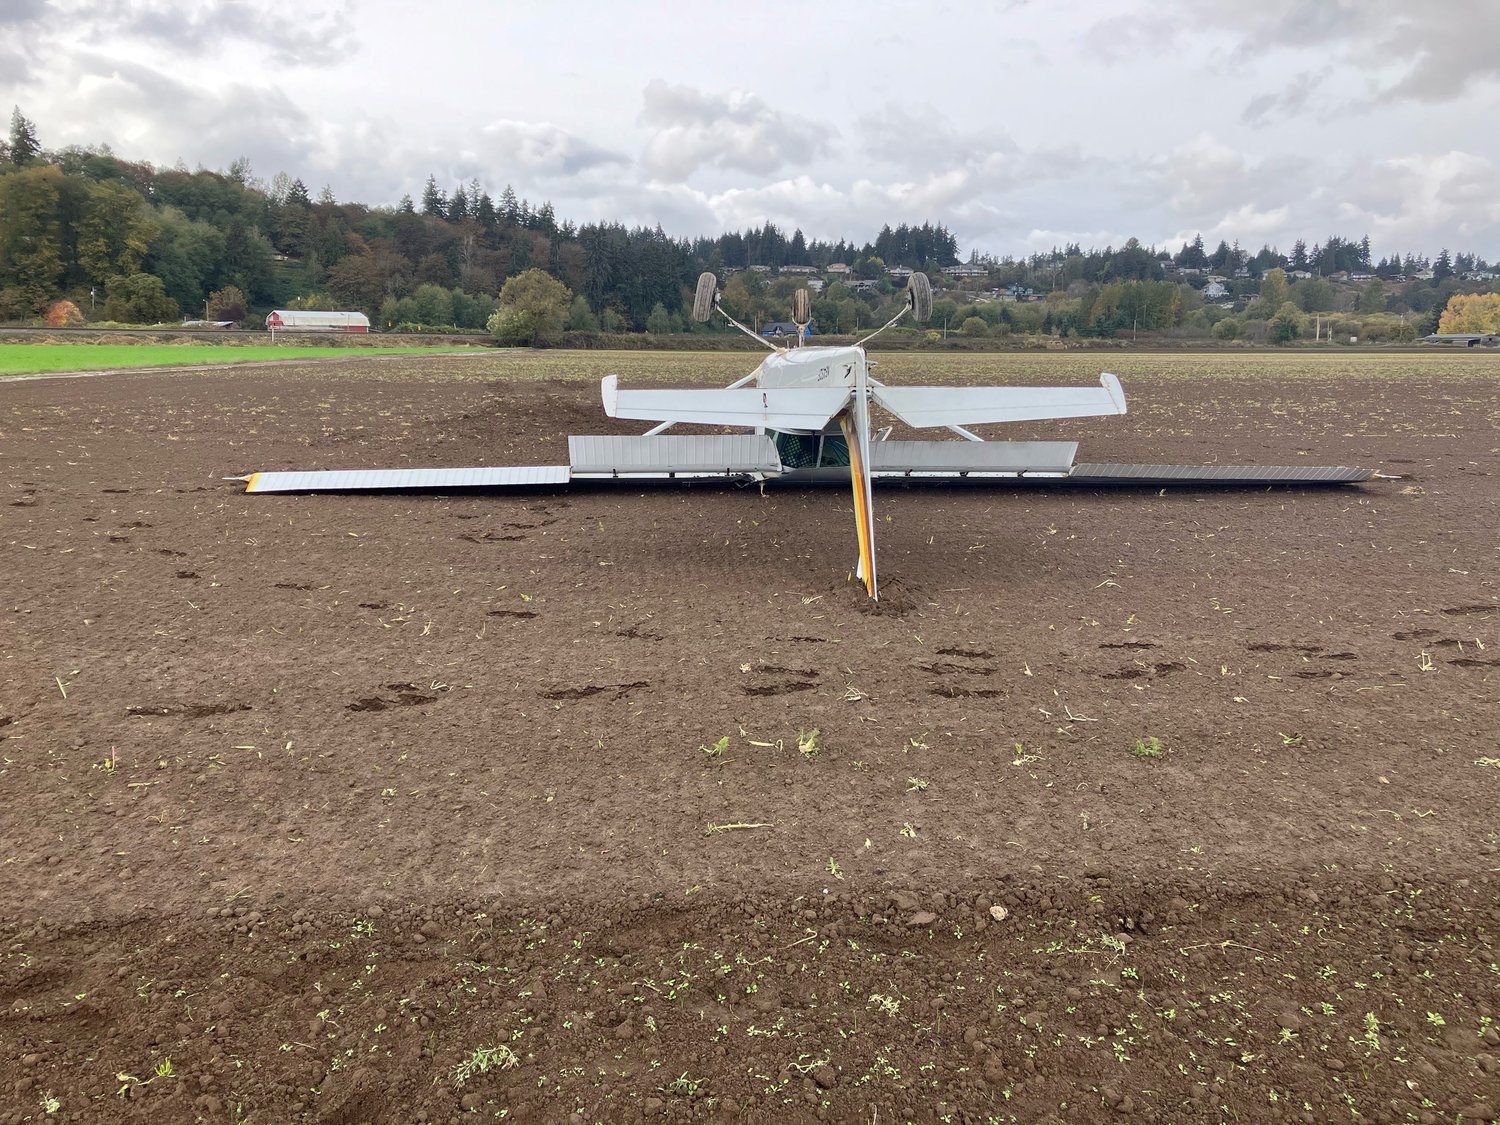 A small two-seater plane crash landed Wednesday afternoon and flipped onto its wings in a field southeast of Tacoma, in the Waller area of Pierce County, according to the Sheriff's Department.